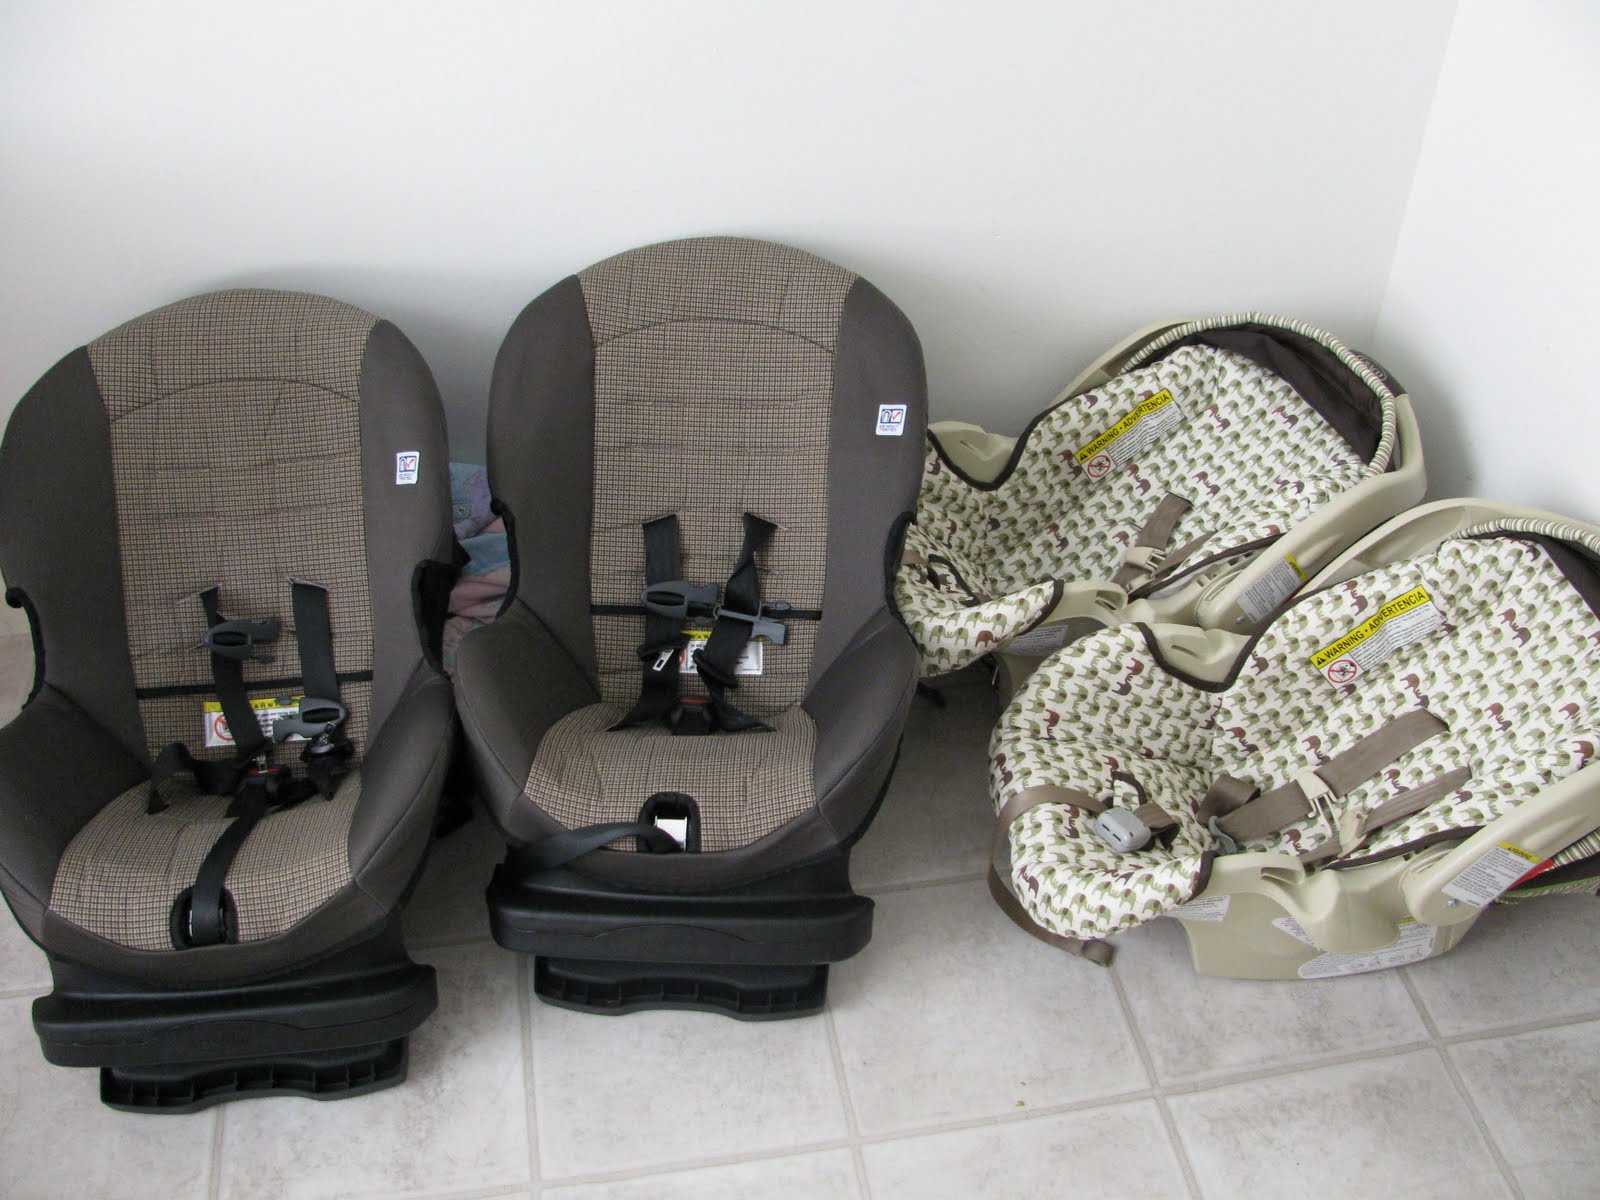 How To Get Free Car Seats My, How To Get Free Car Seats Program